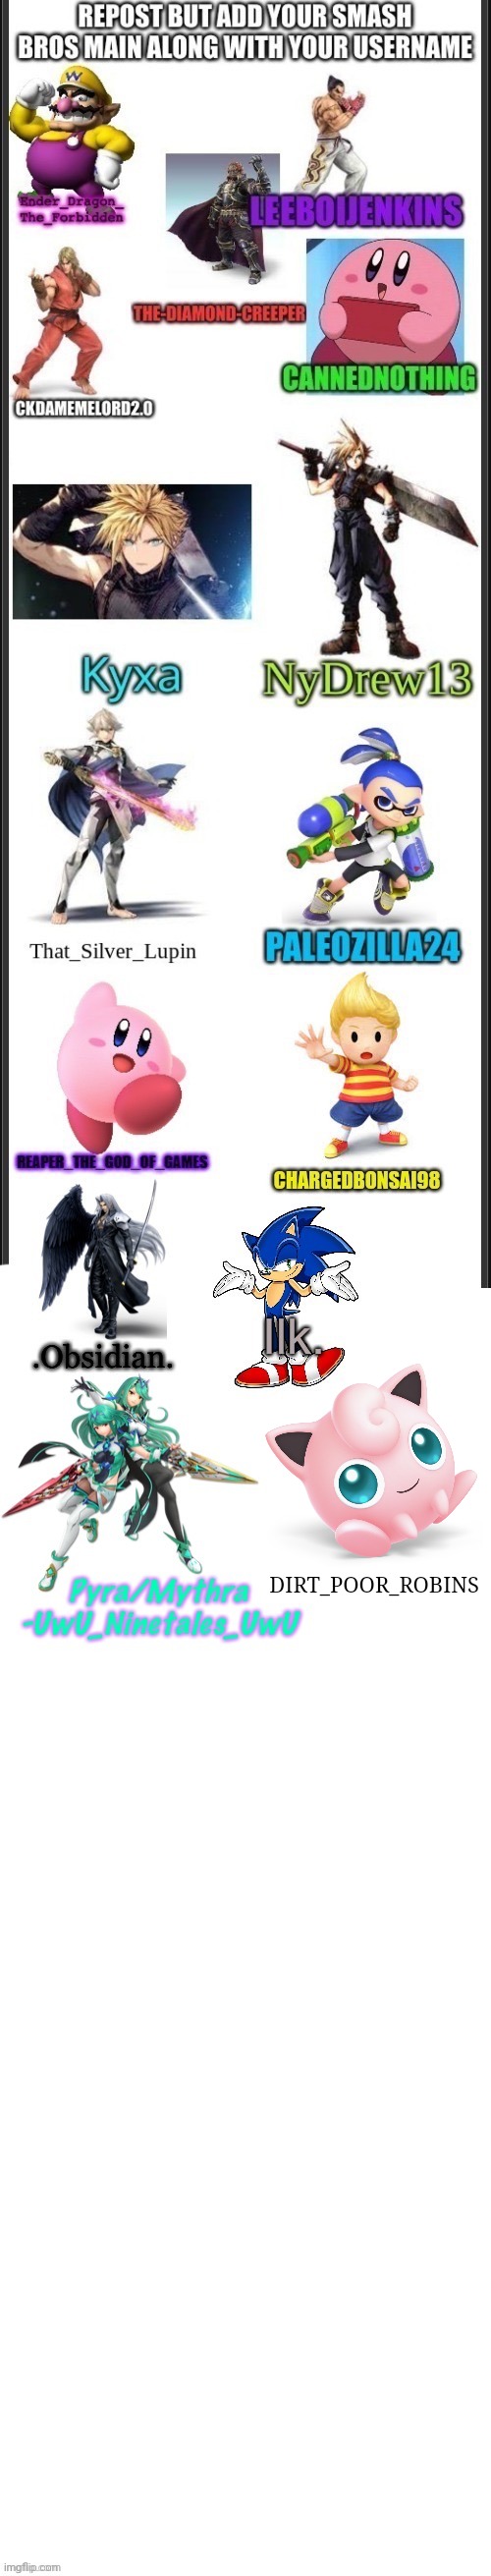 Jigglypuff joins the Page! | DIRT_POOR_ROBINS | image tagged in pokemon,super smash bros,jigglypuff | made w/ Imgflip meme maker